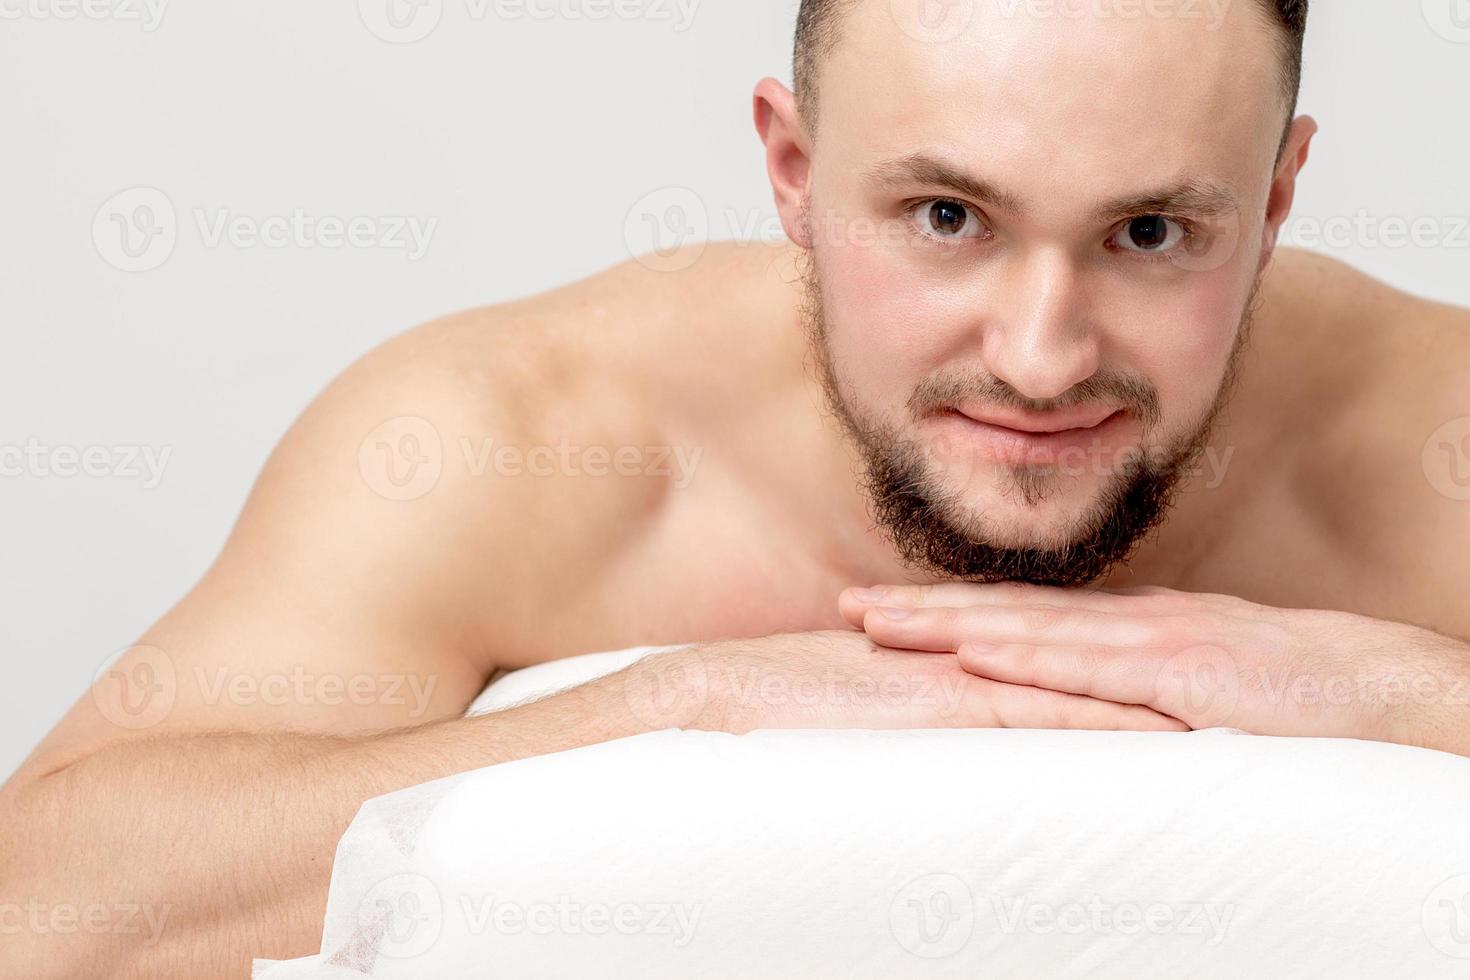 Man lying on front on table spa photo